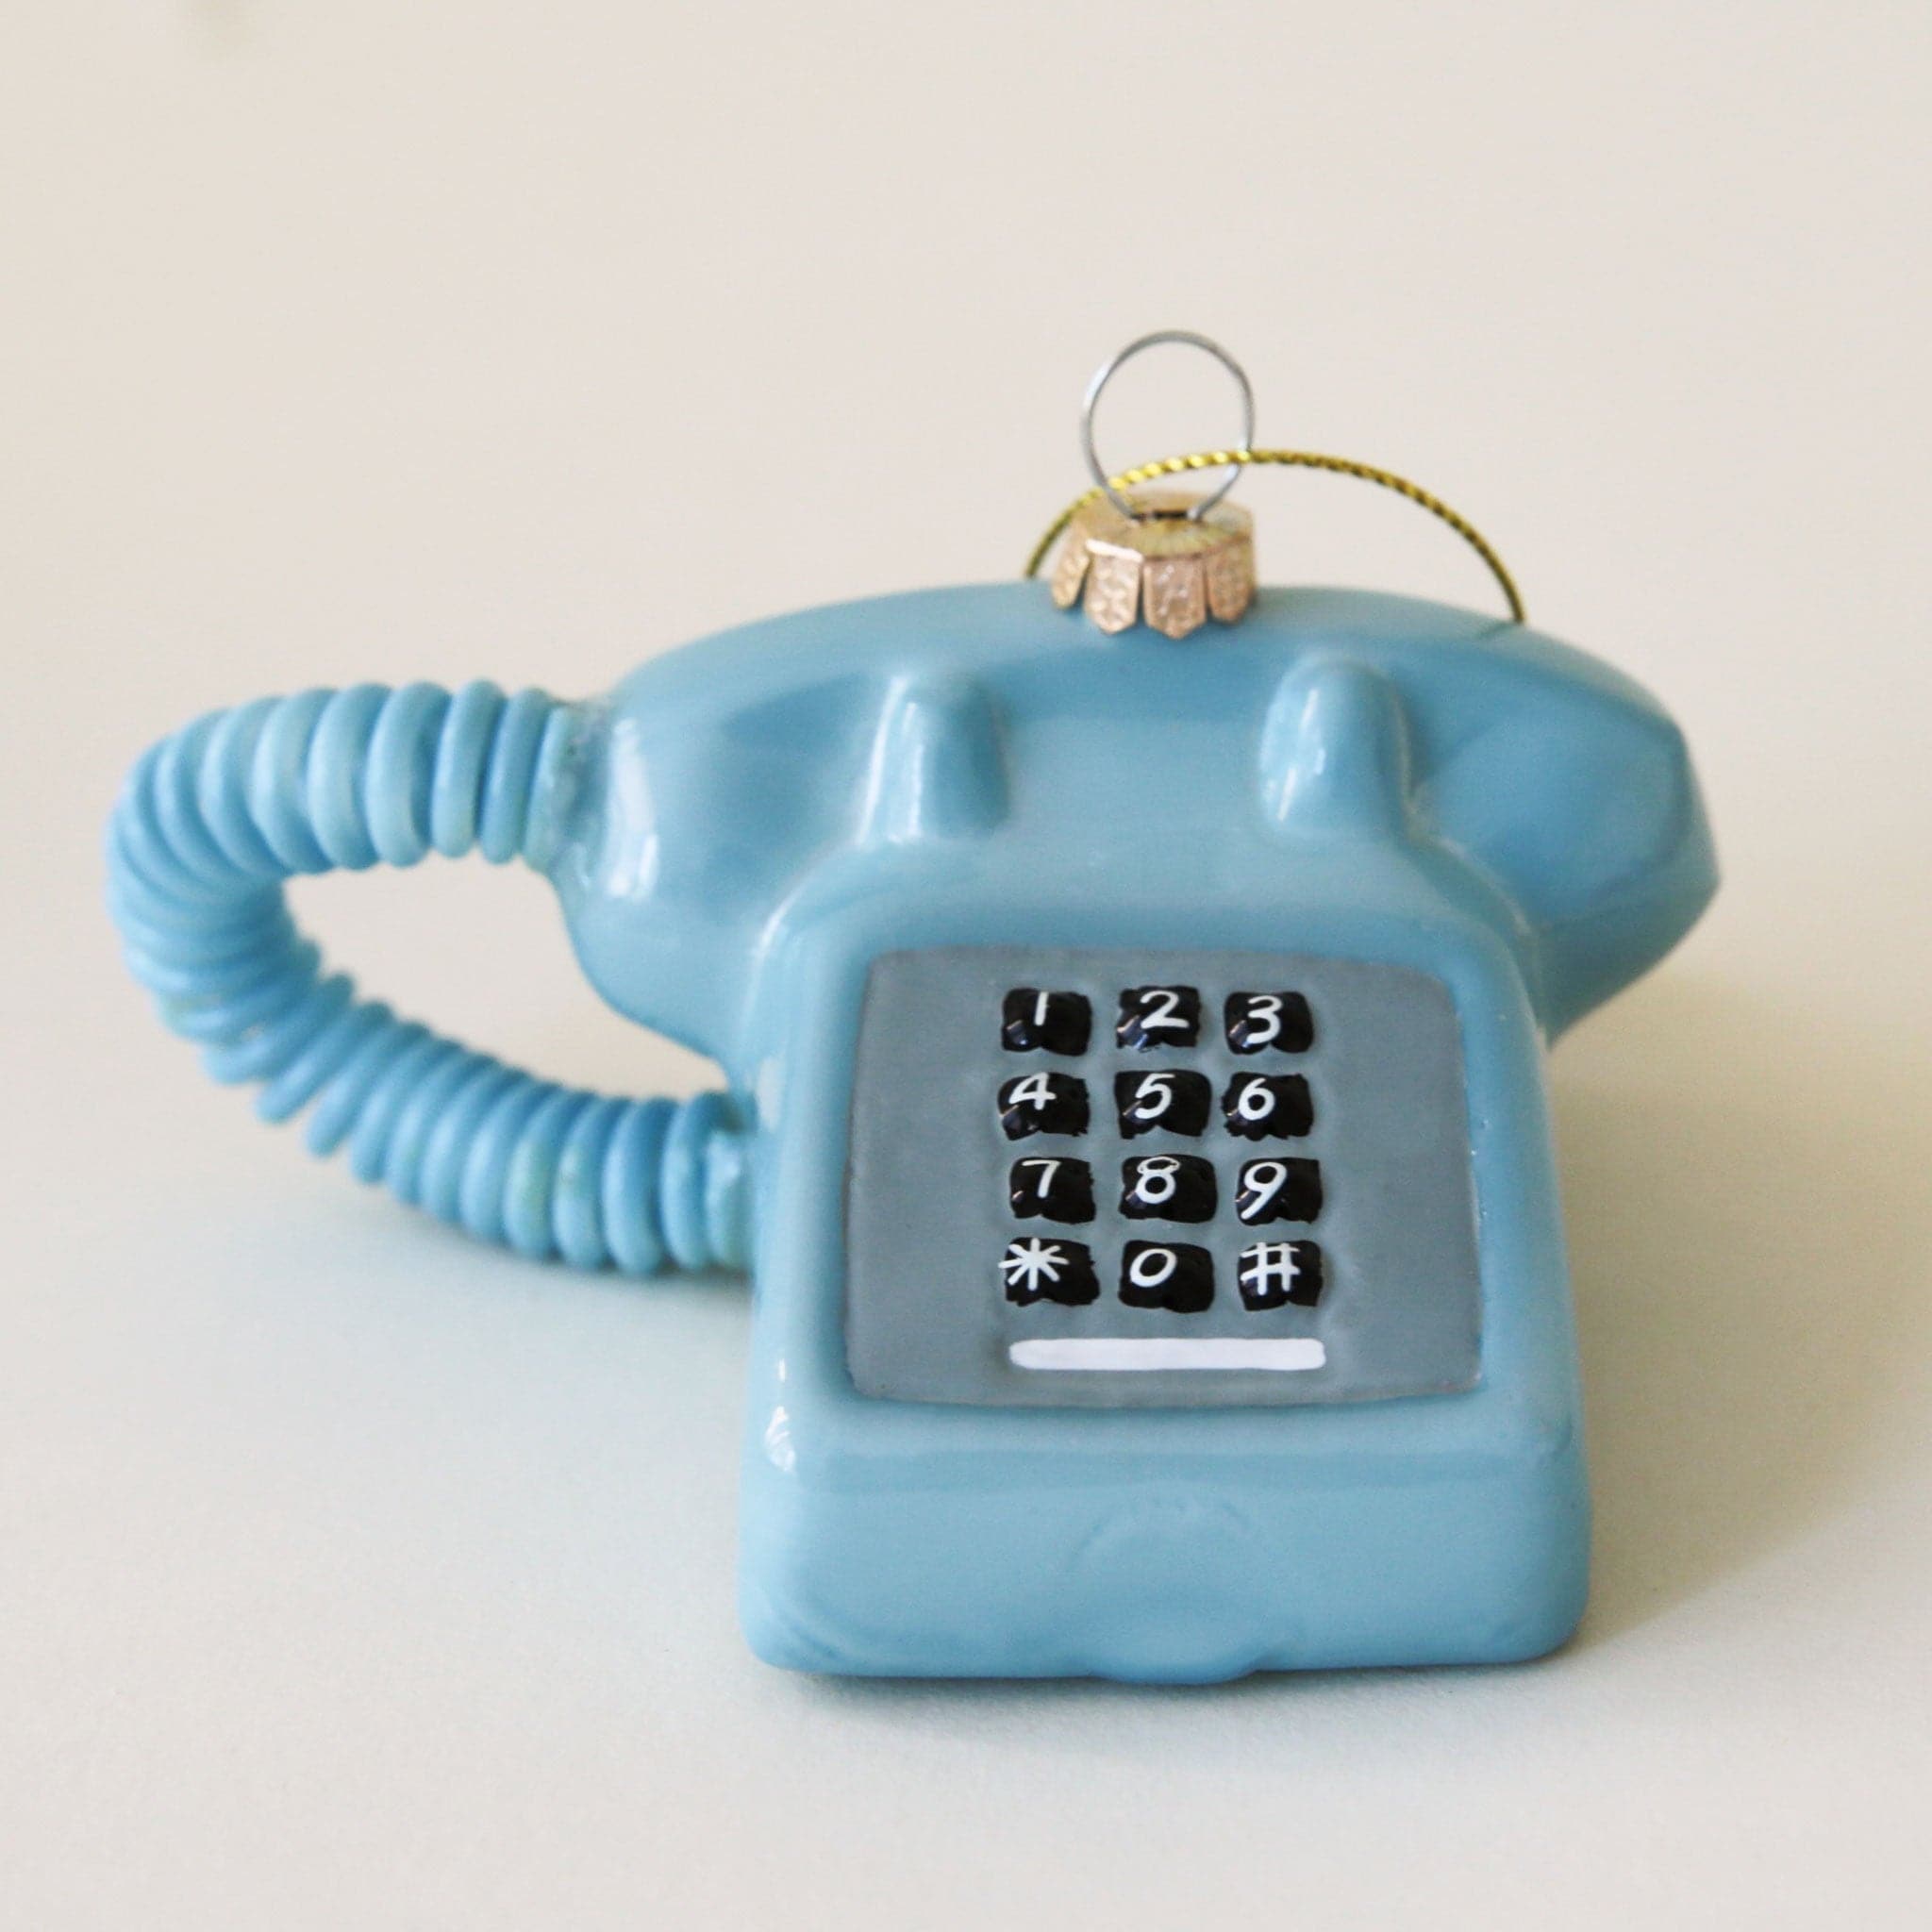 A glass touch tone phone ornament in a shiny blue shade.